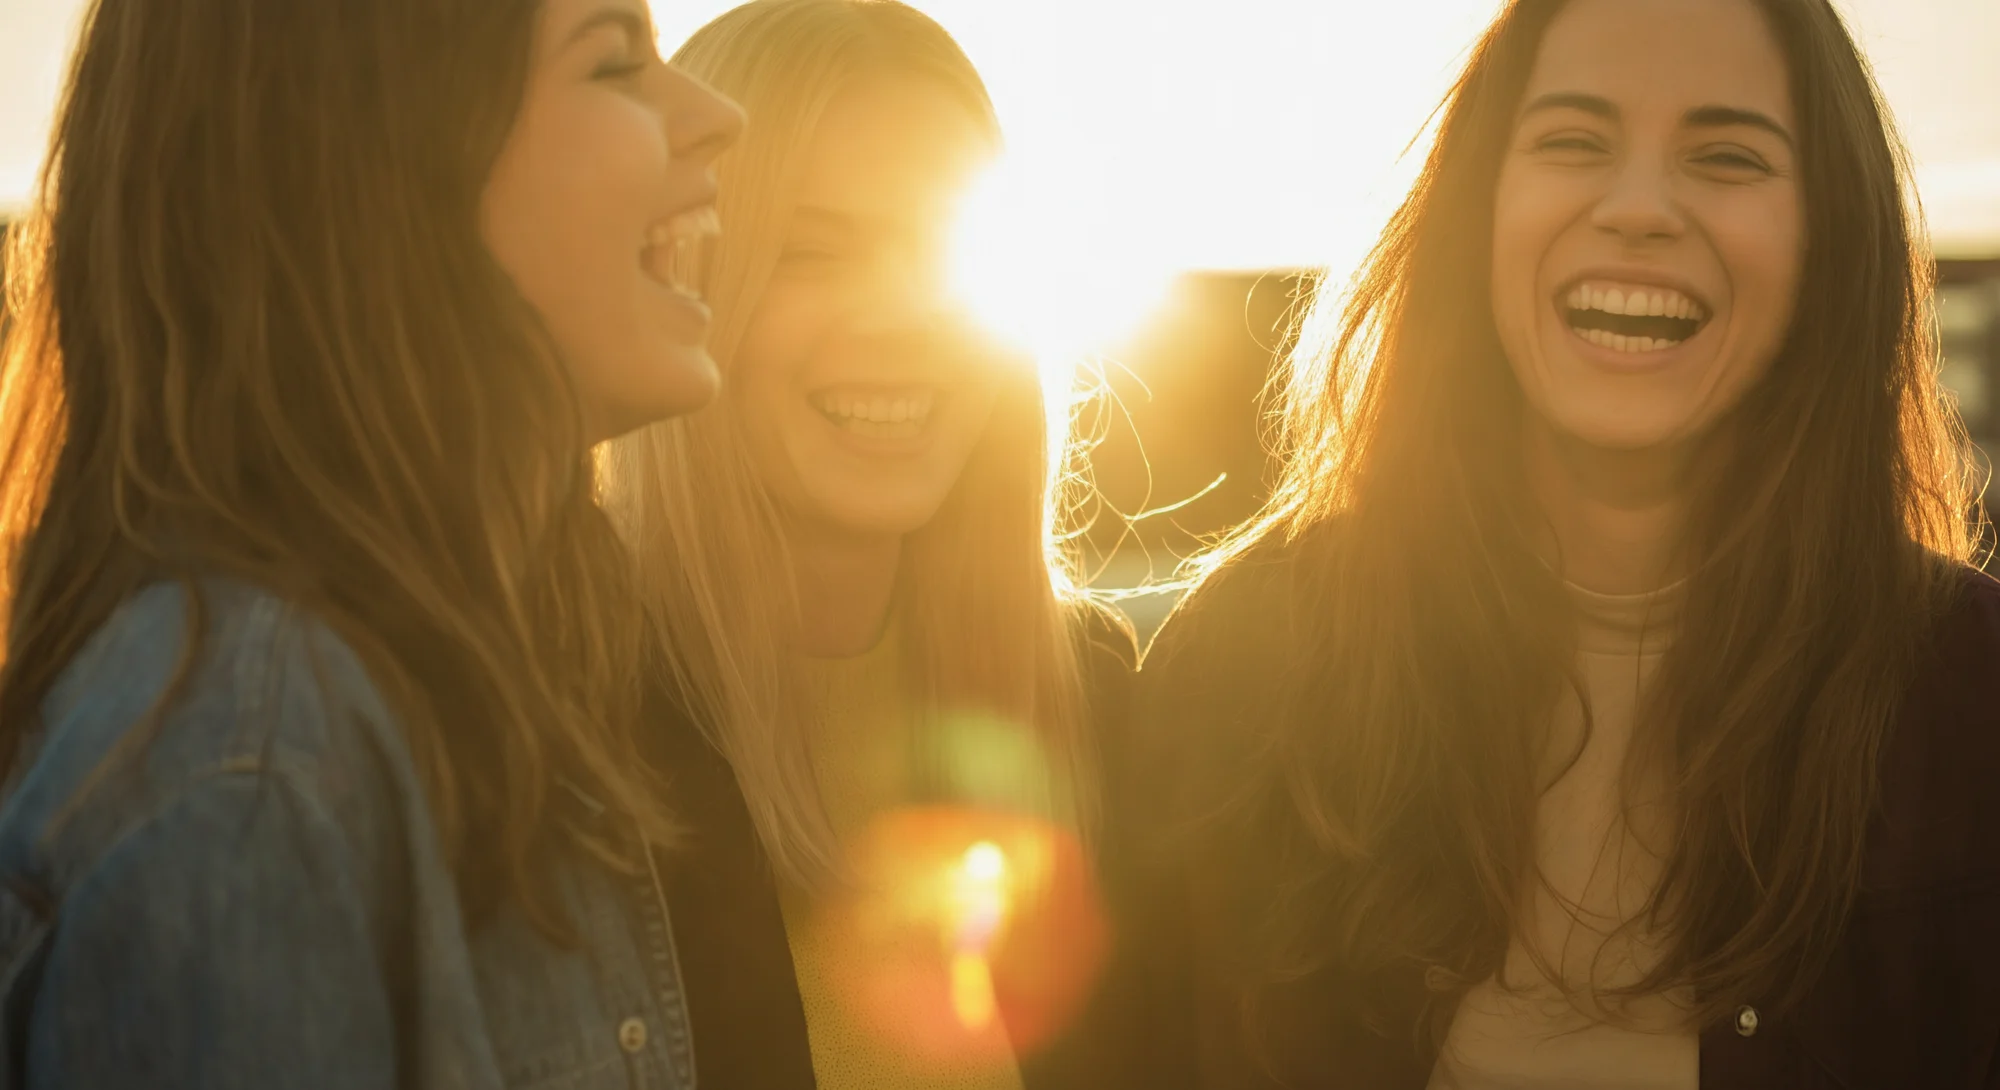 Three young women are standing in a circle and happily laughing. Behind them, the sun is setting creating a lens flare and imbuing the image with a warm glow.